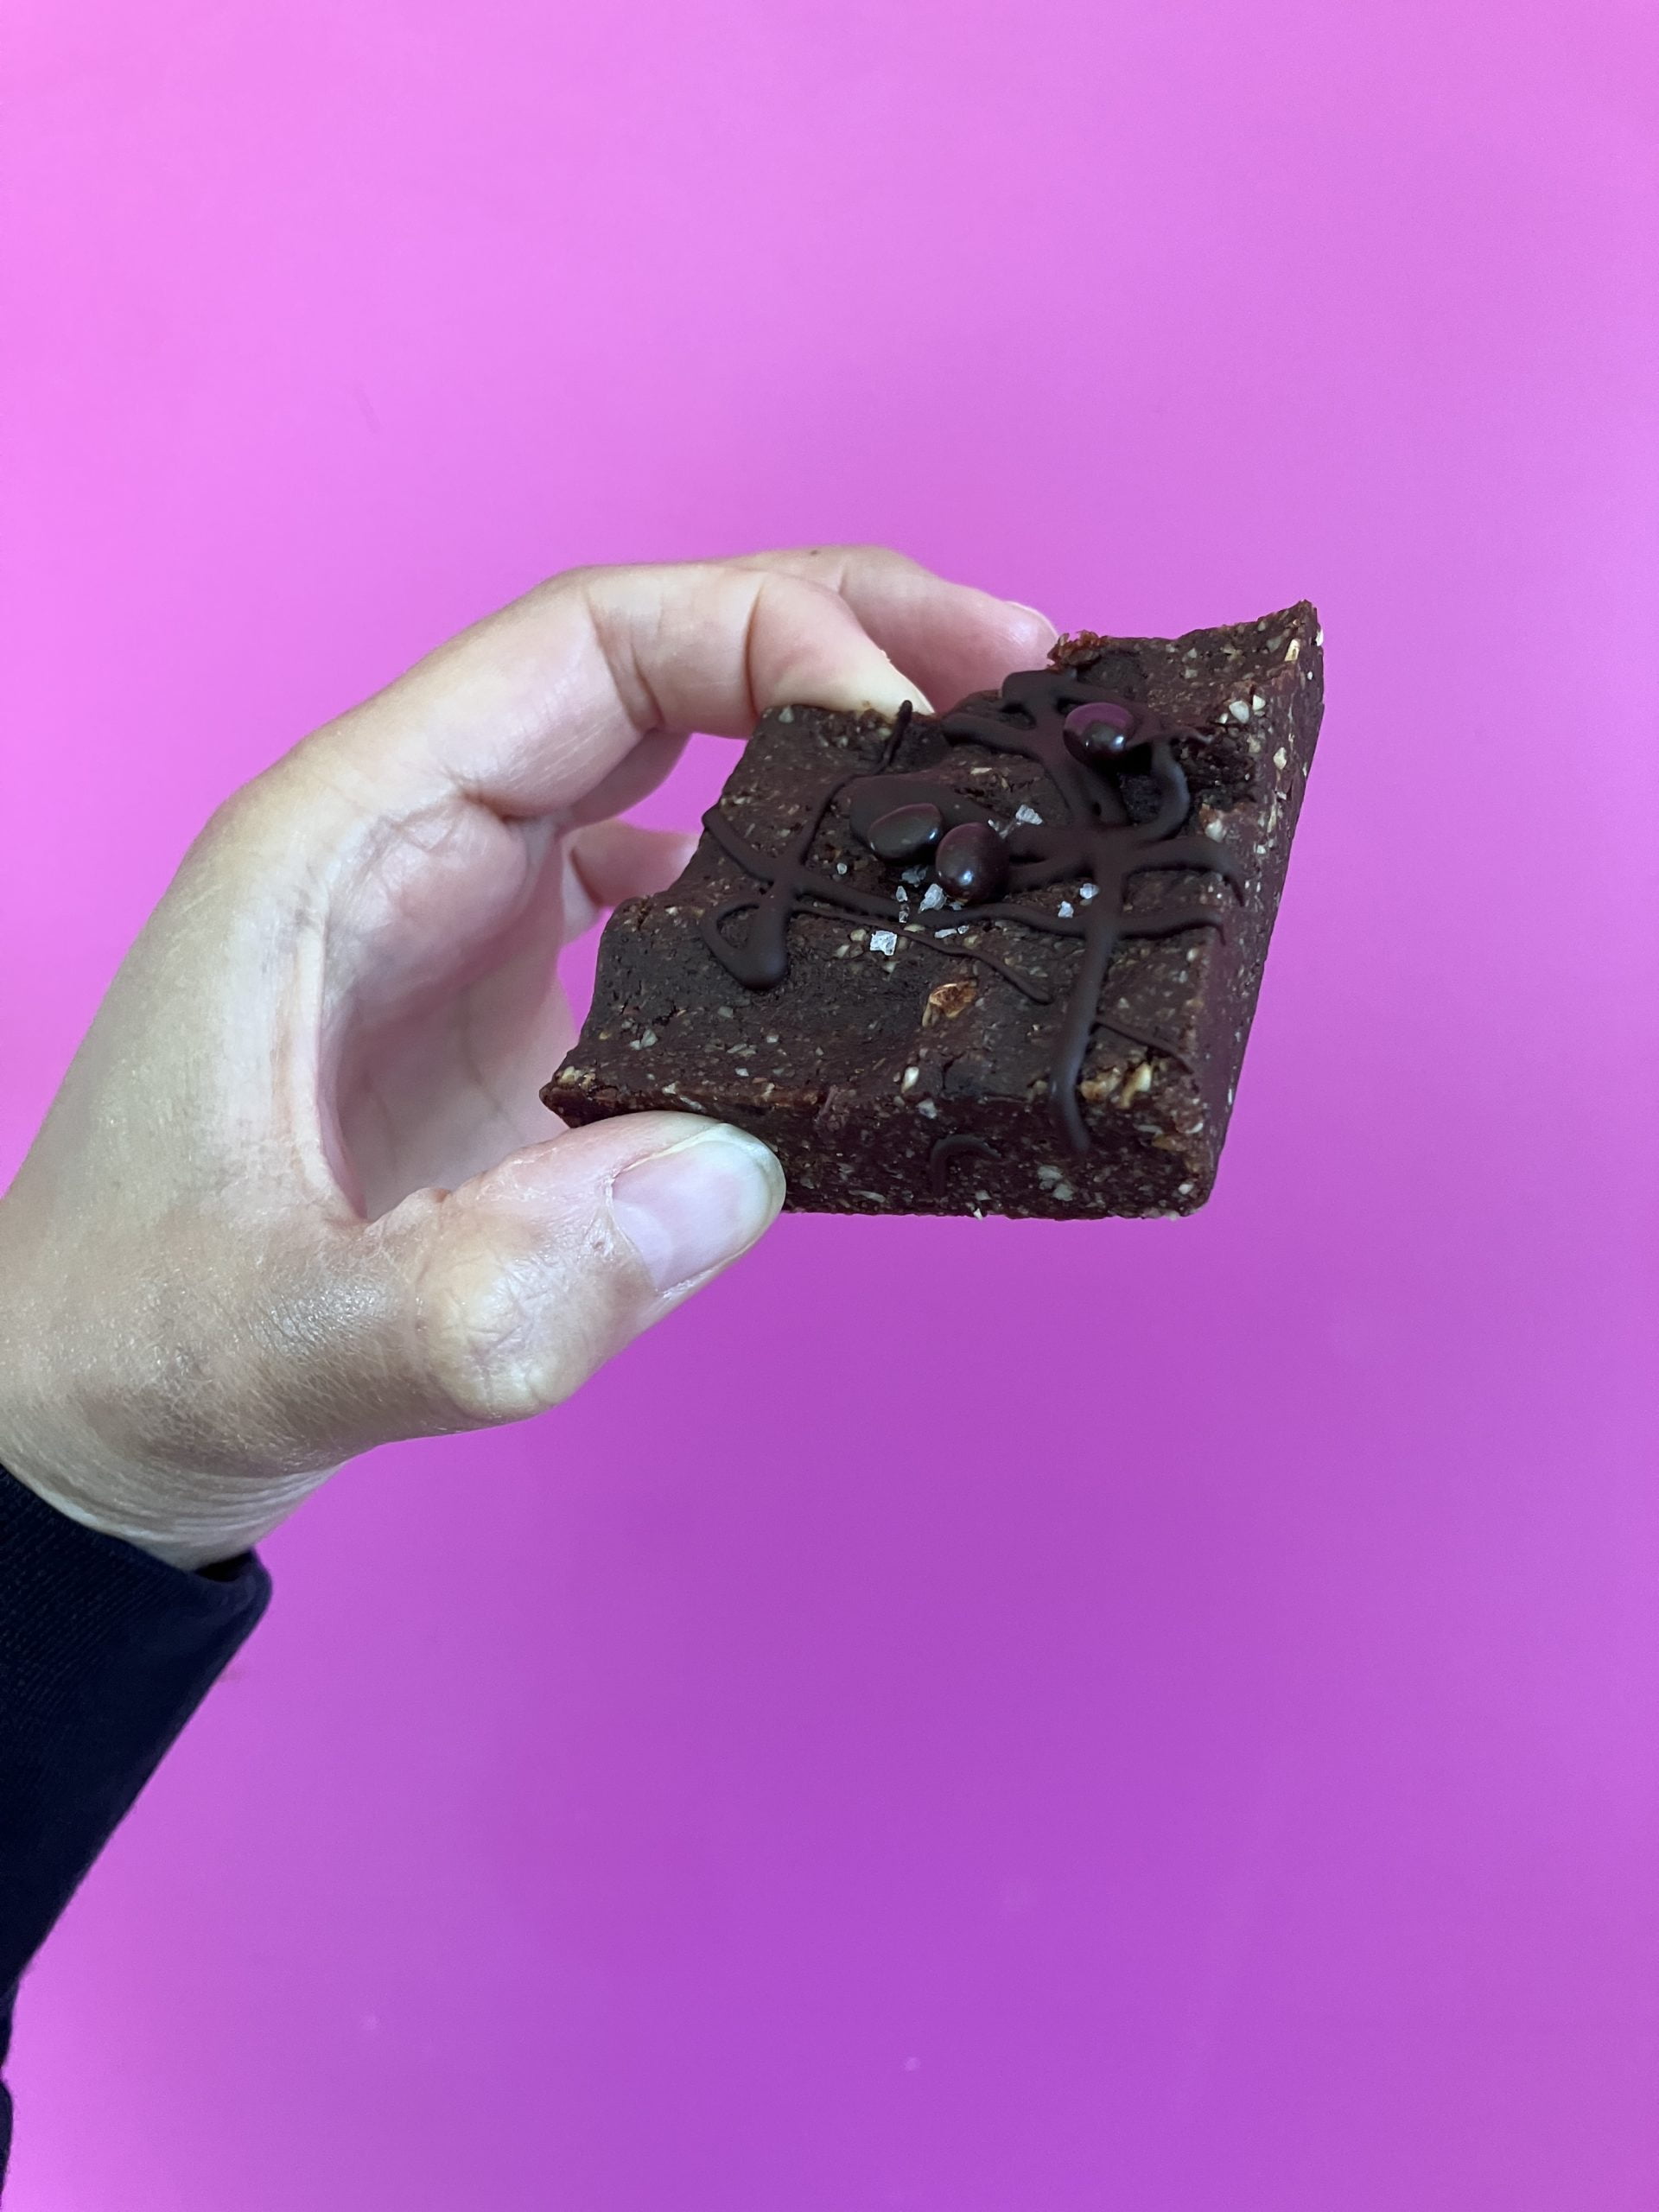 Charlotte (co founder) has her wrist in shot. She has a black top on which is slightly visible. She is holding one of their keto brownies in the air, against a pink background.